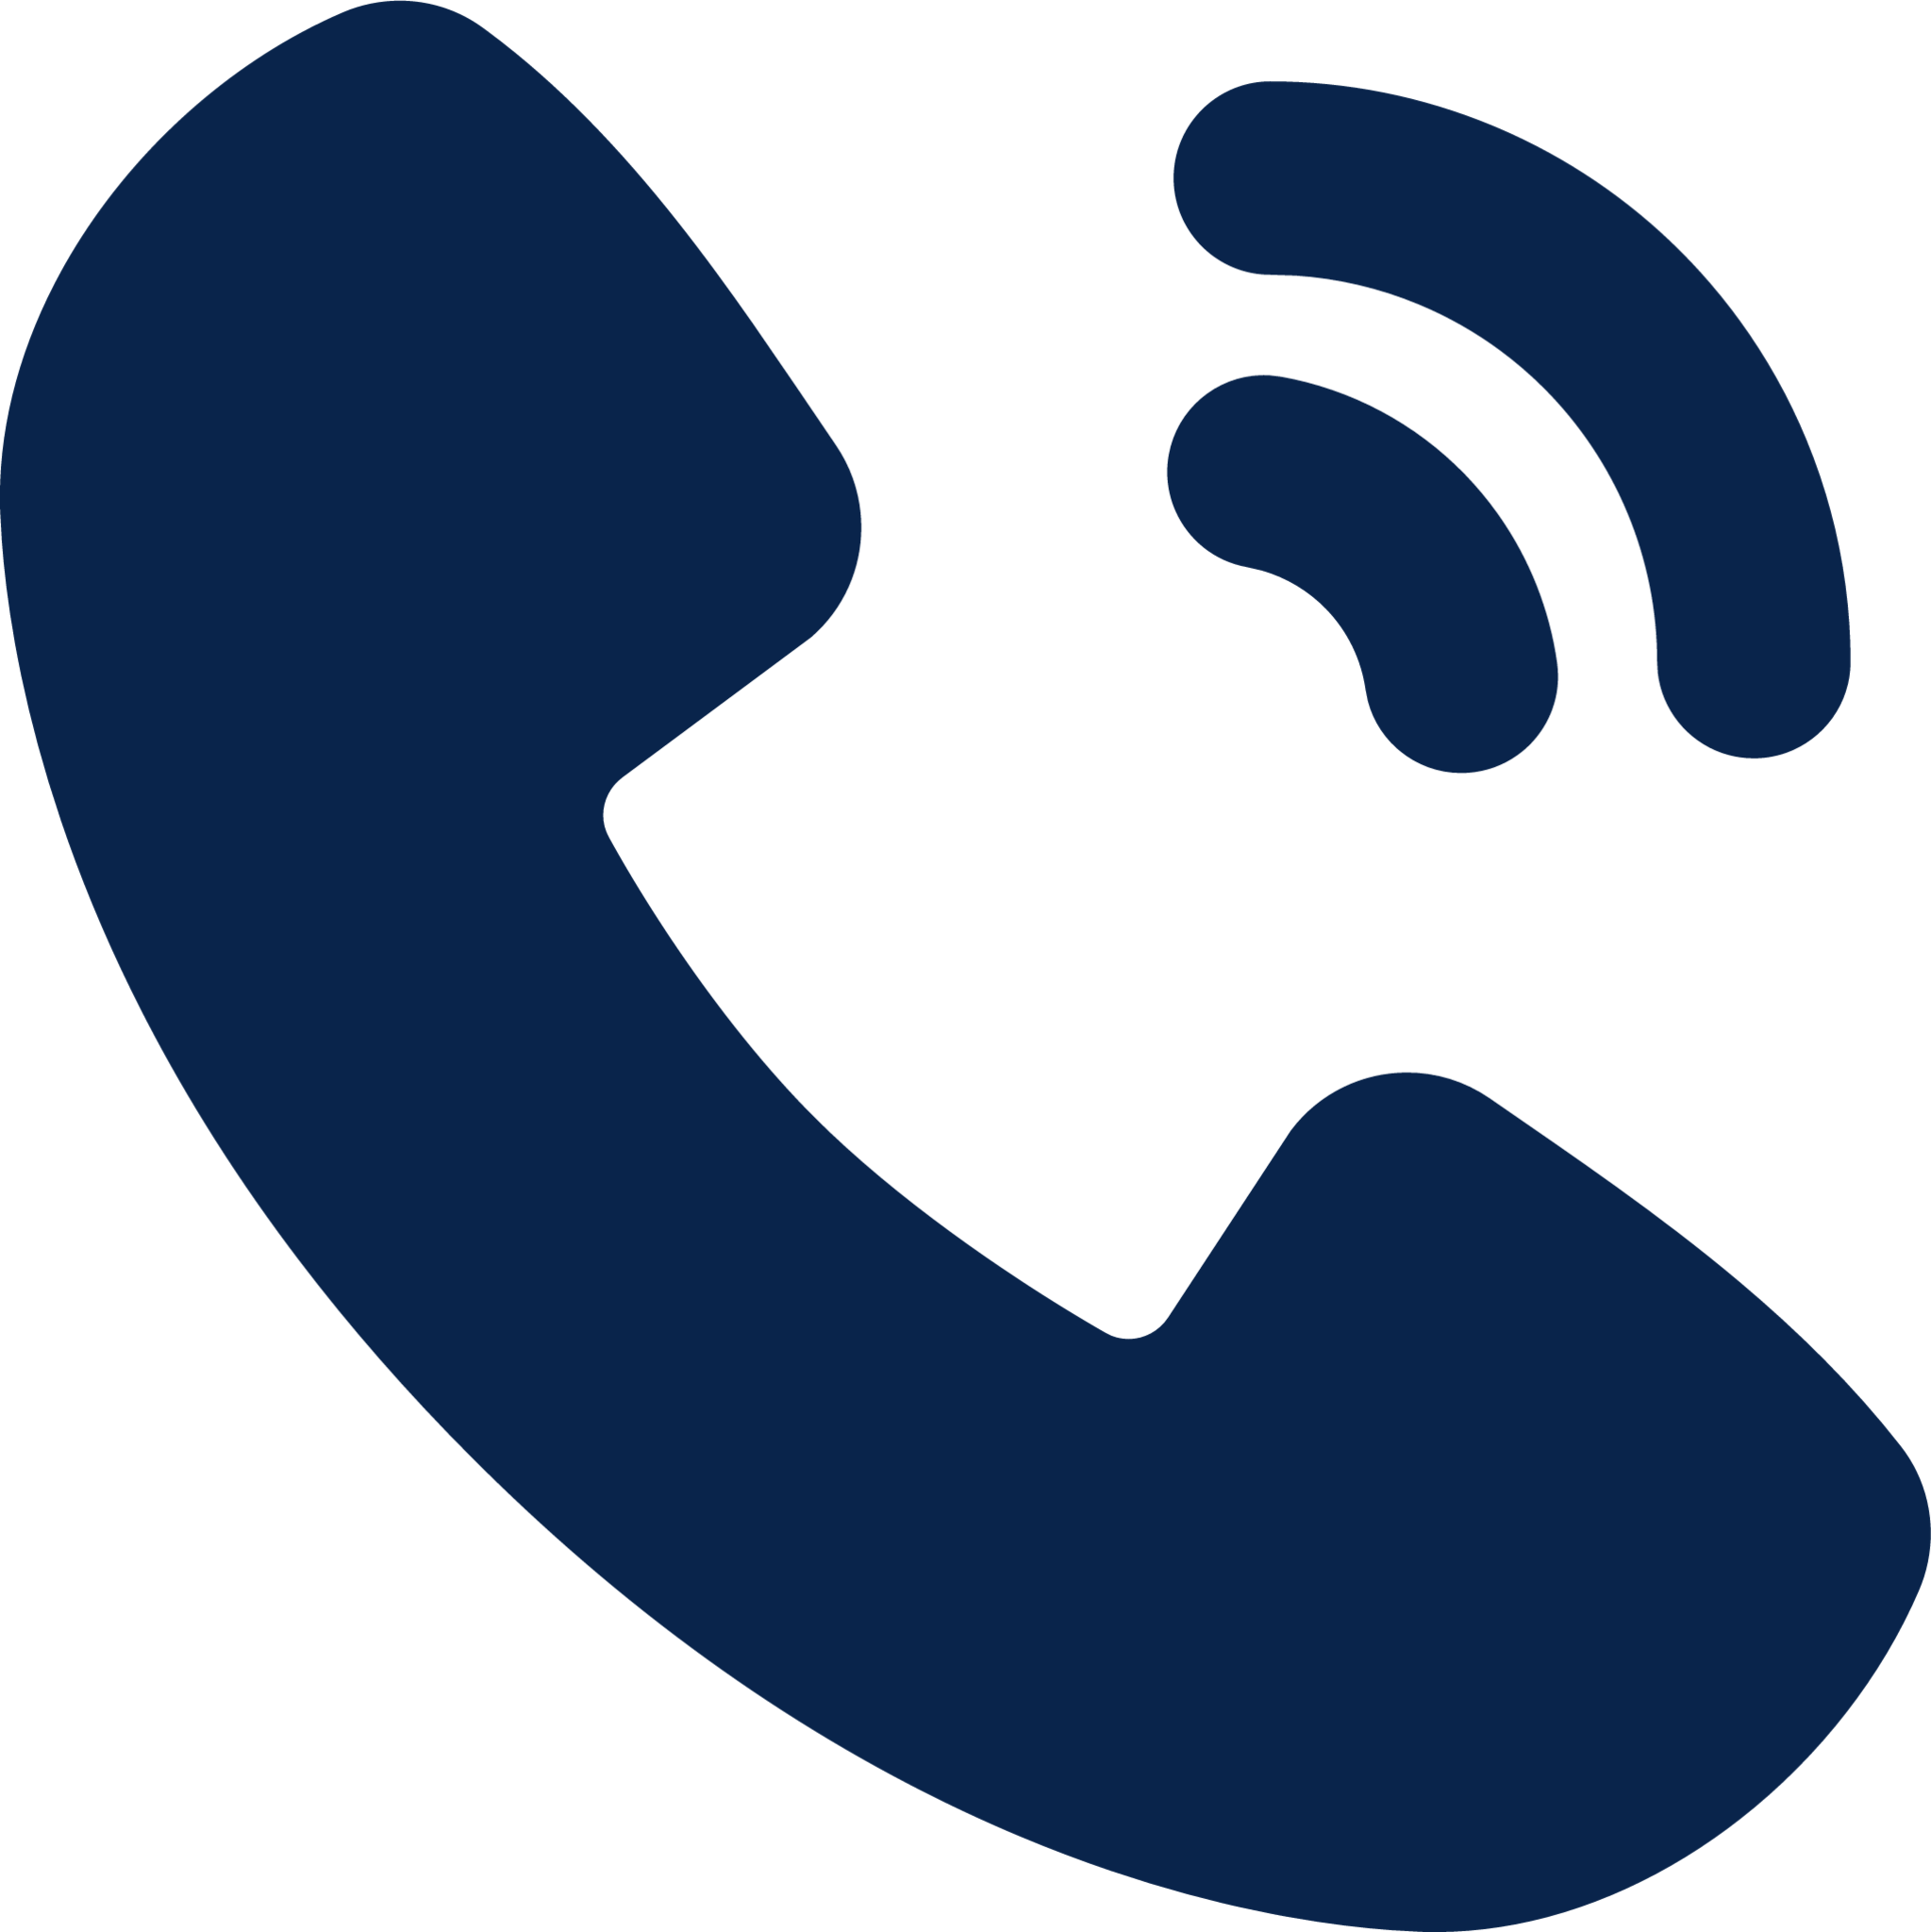 https://static-00.iconduck.com/assets.00/phone-call-fill-contact-icon-2047x2048-vcoagu3q.png